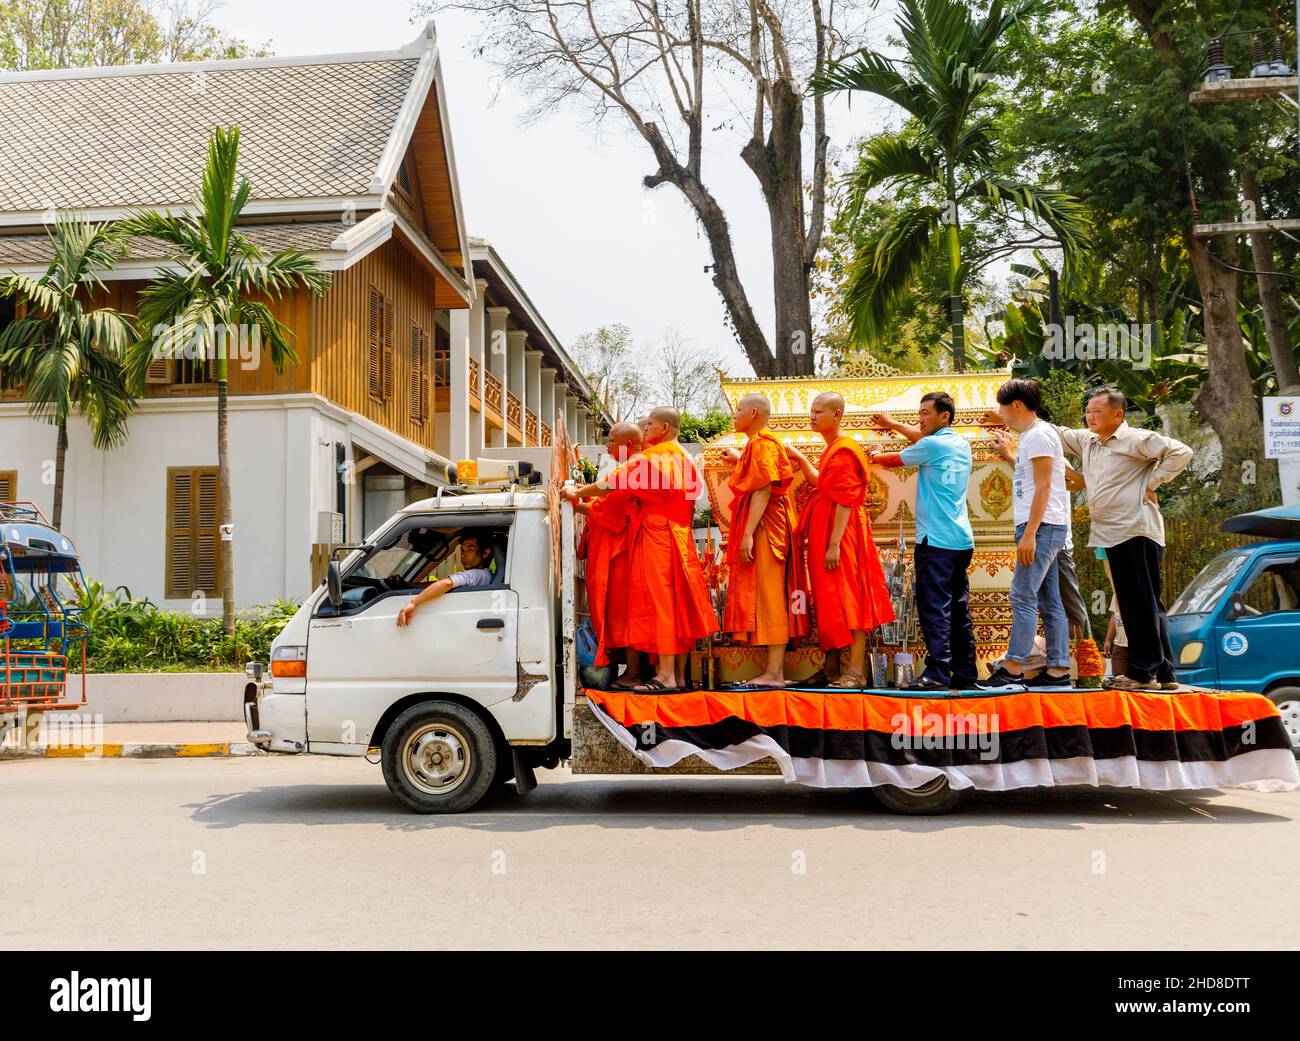 Street scene in Luang Prabang, northern Laos, south-east Asia: traditional saffron robed Buddhist monks stand on the back of a van Stock Photo